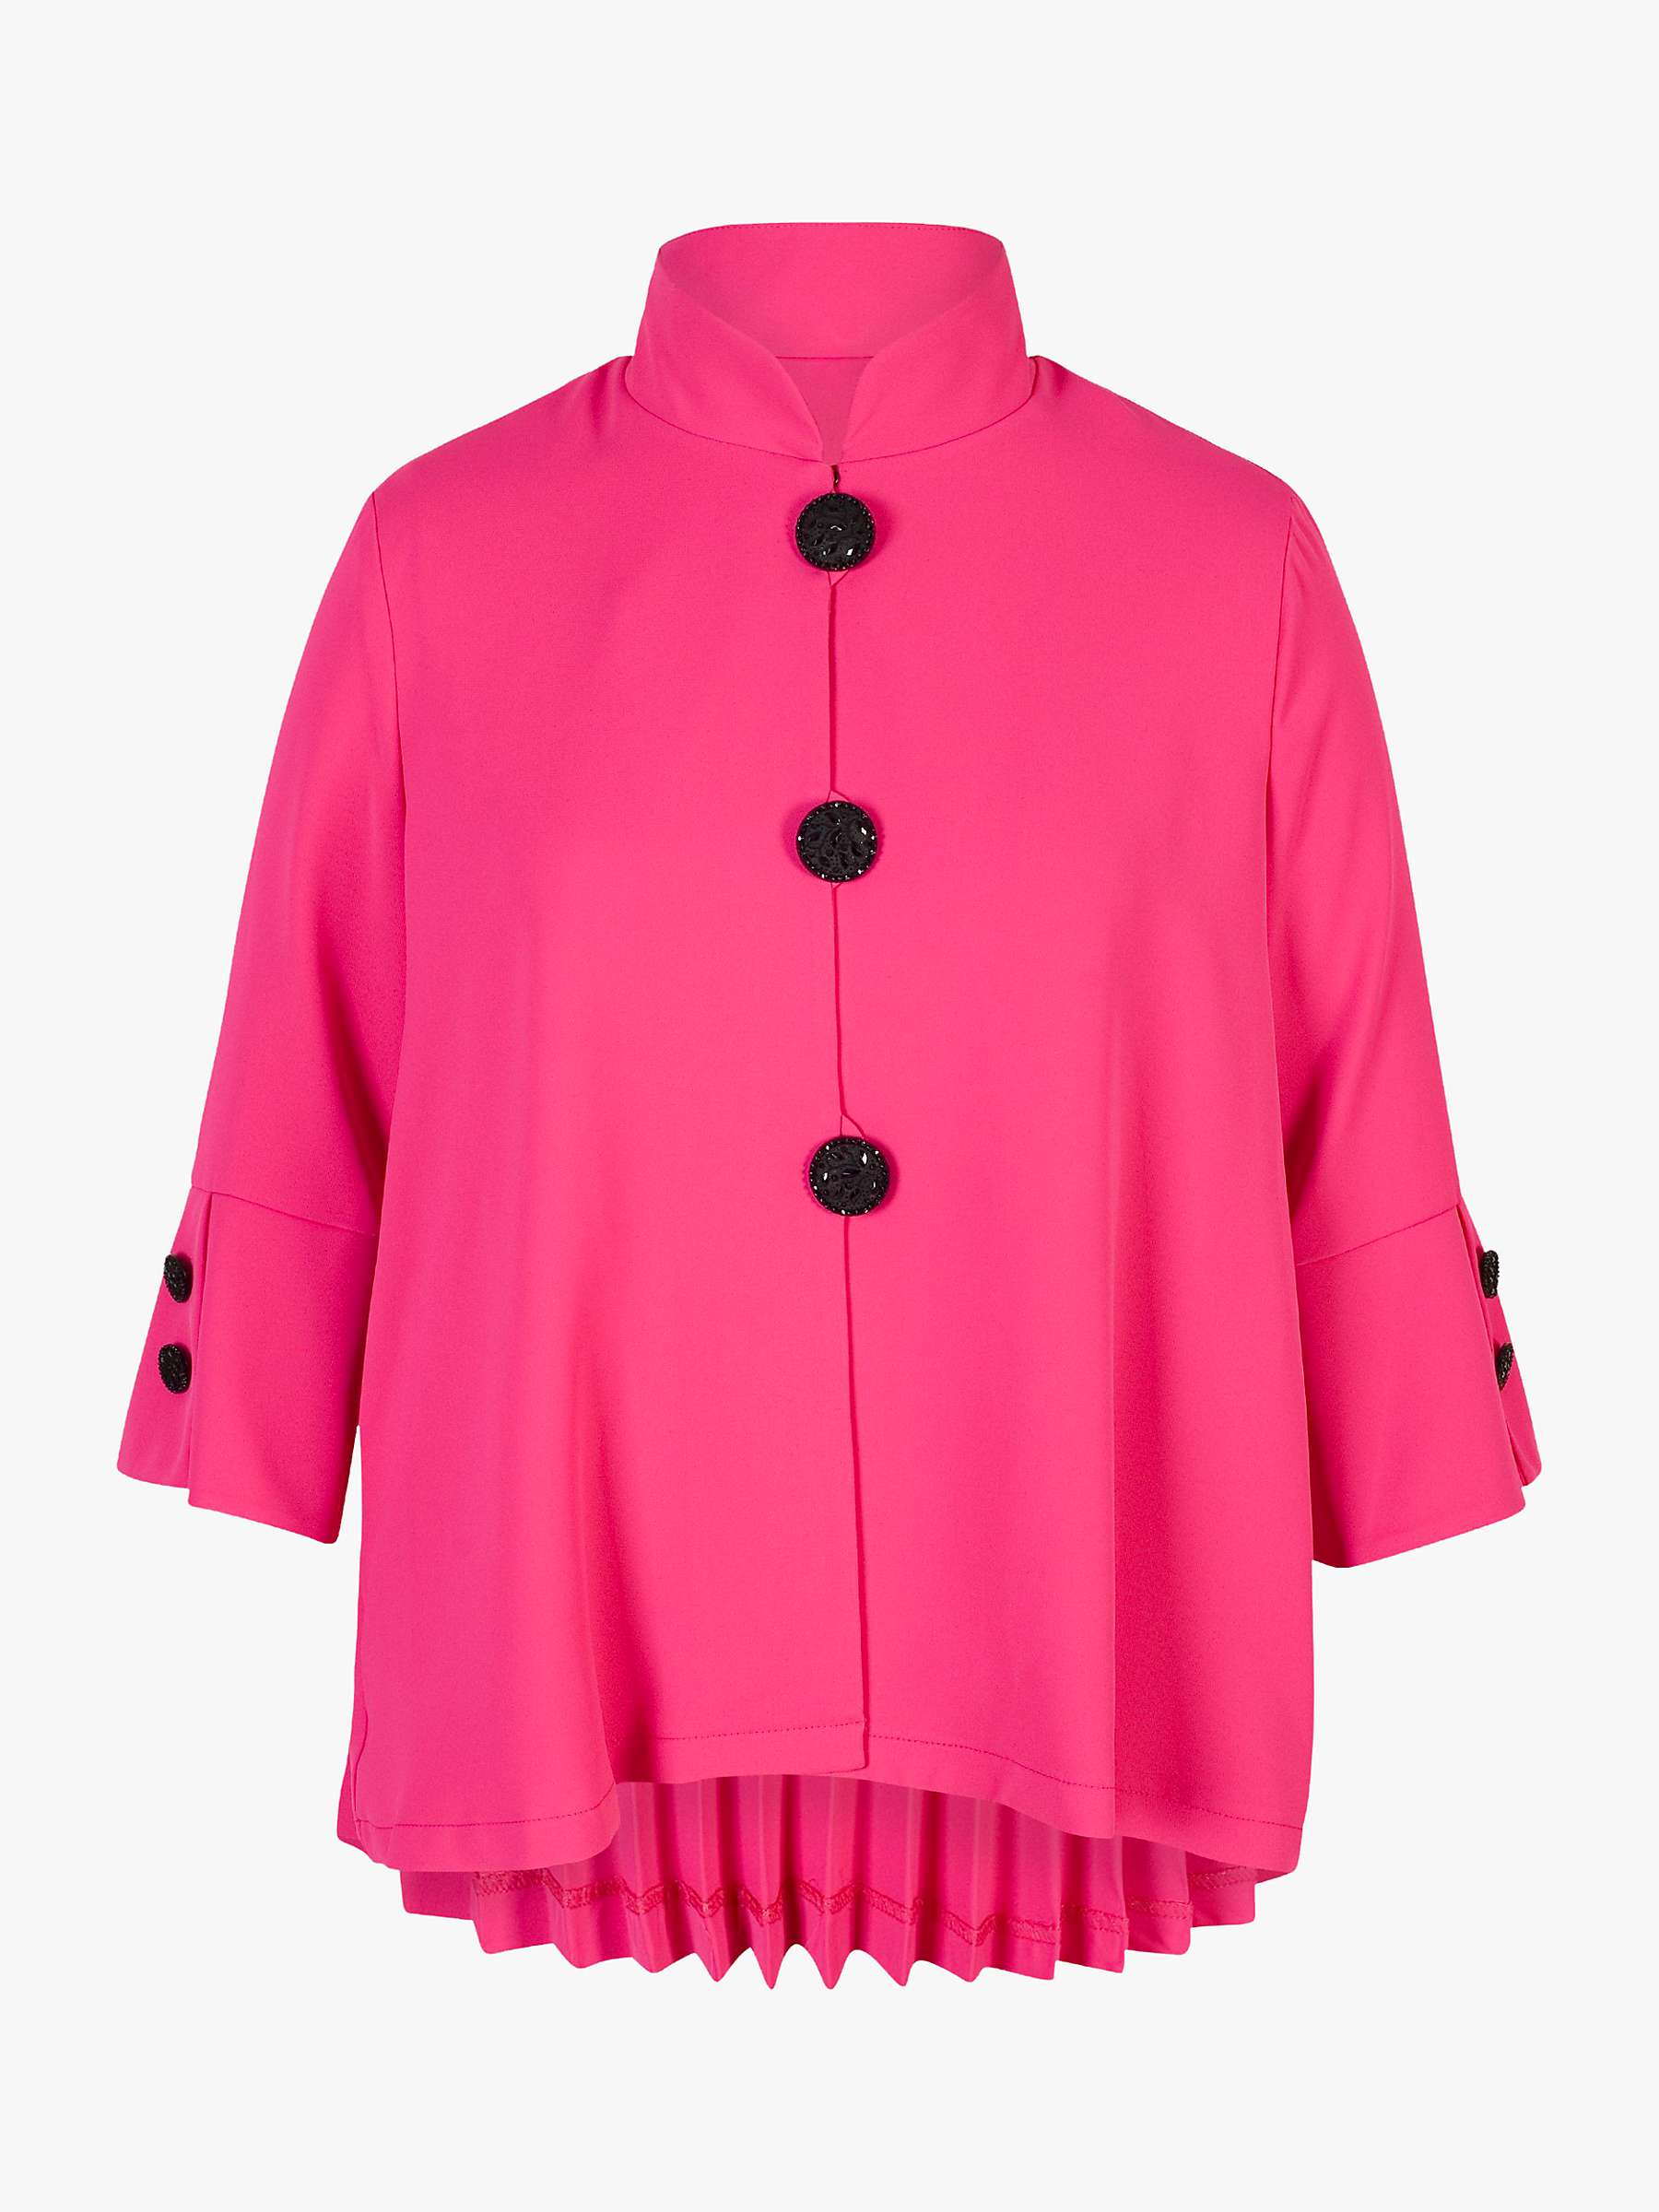 Buy chesca Pleated Button Through Jacket, Hot Pink Online at johnlewis.com